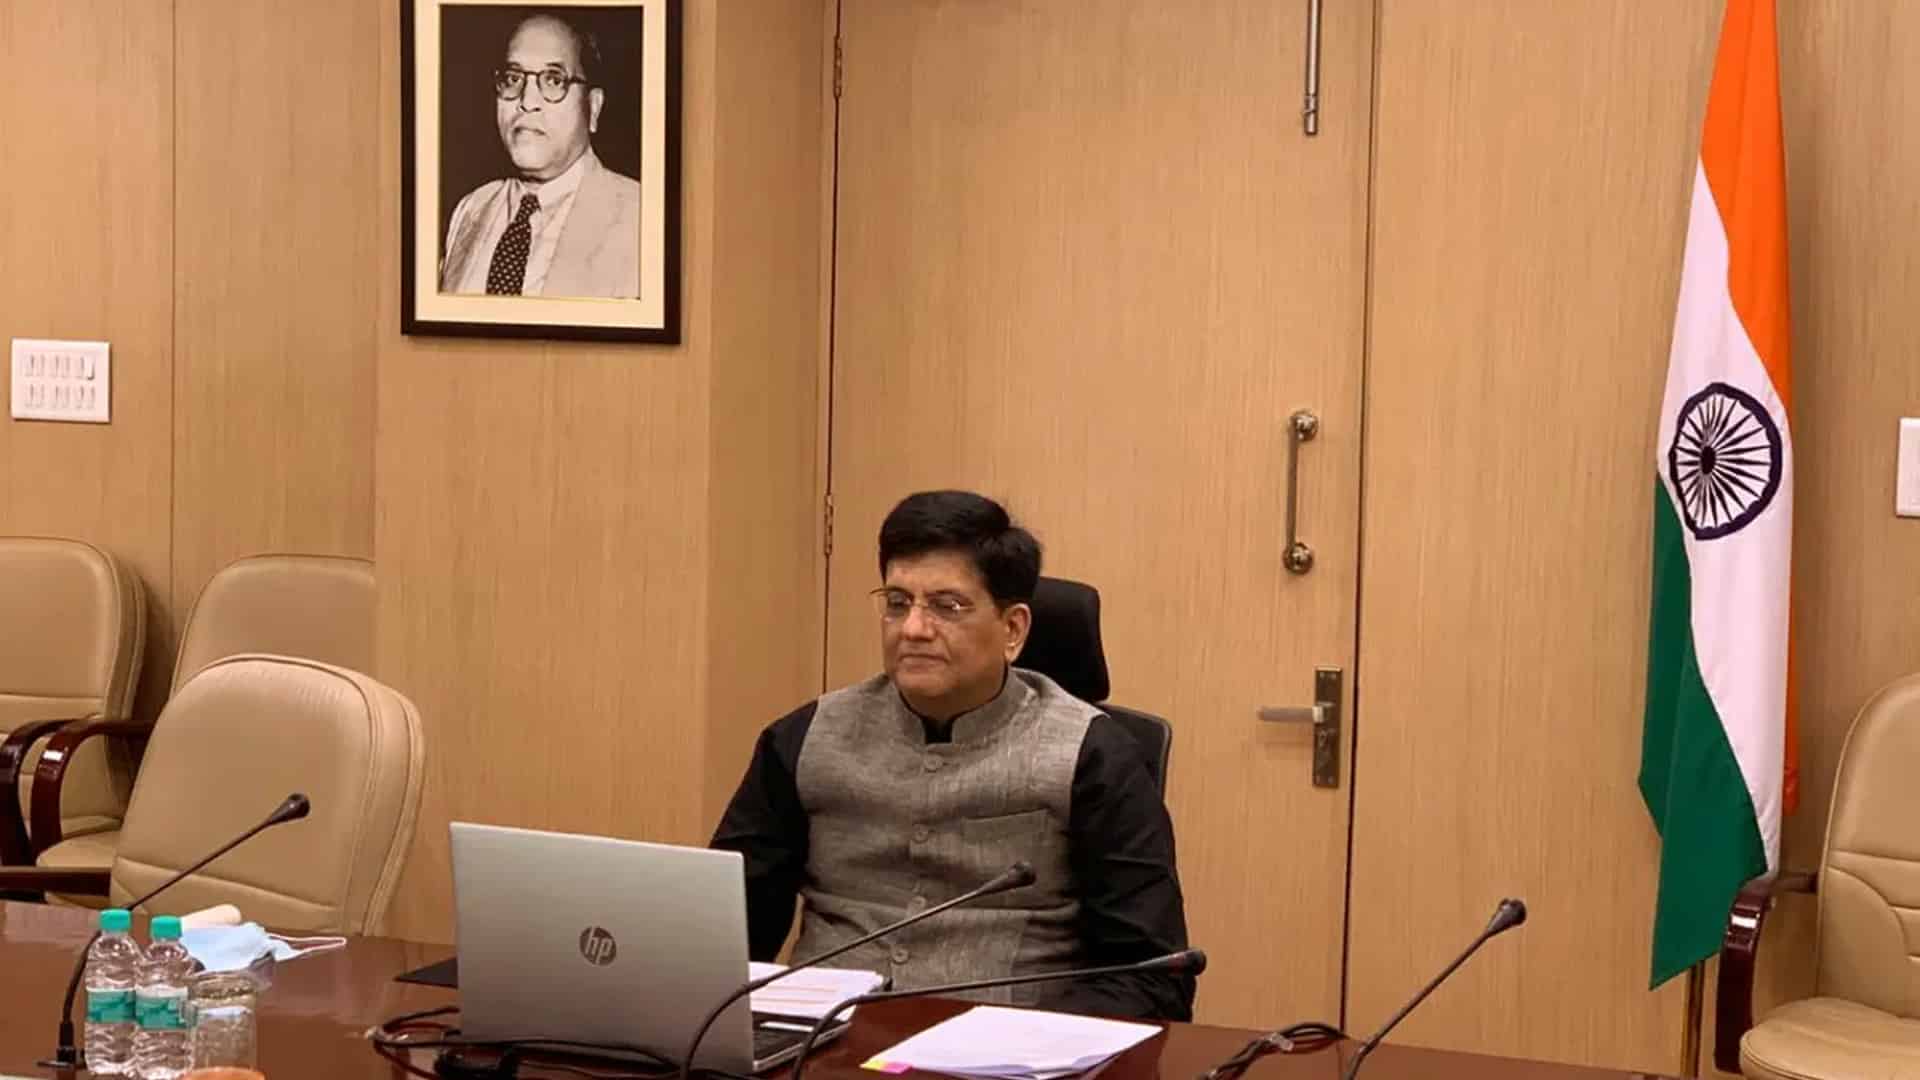 India to Become Fastest-Growing Green Economy of the World: Piyush Goyal, Commerce and Industry Minister